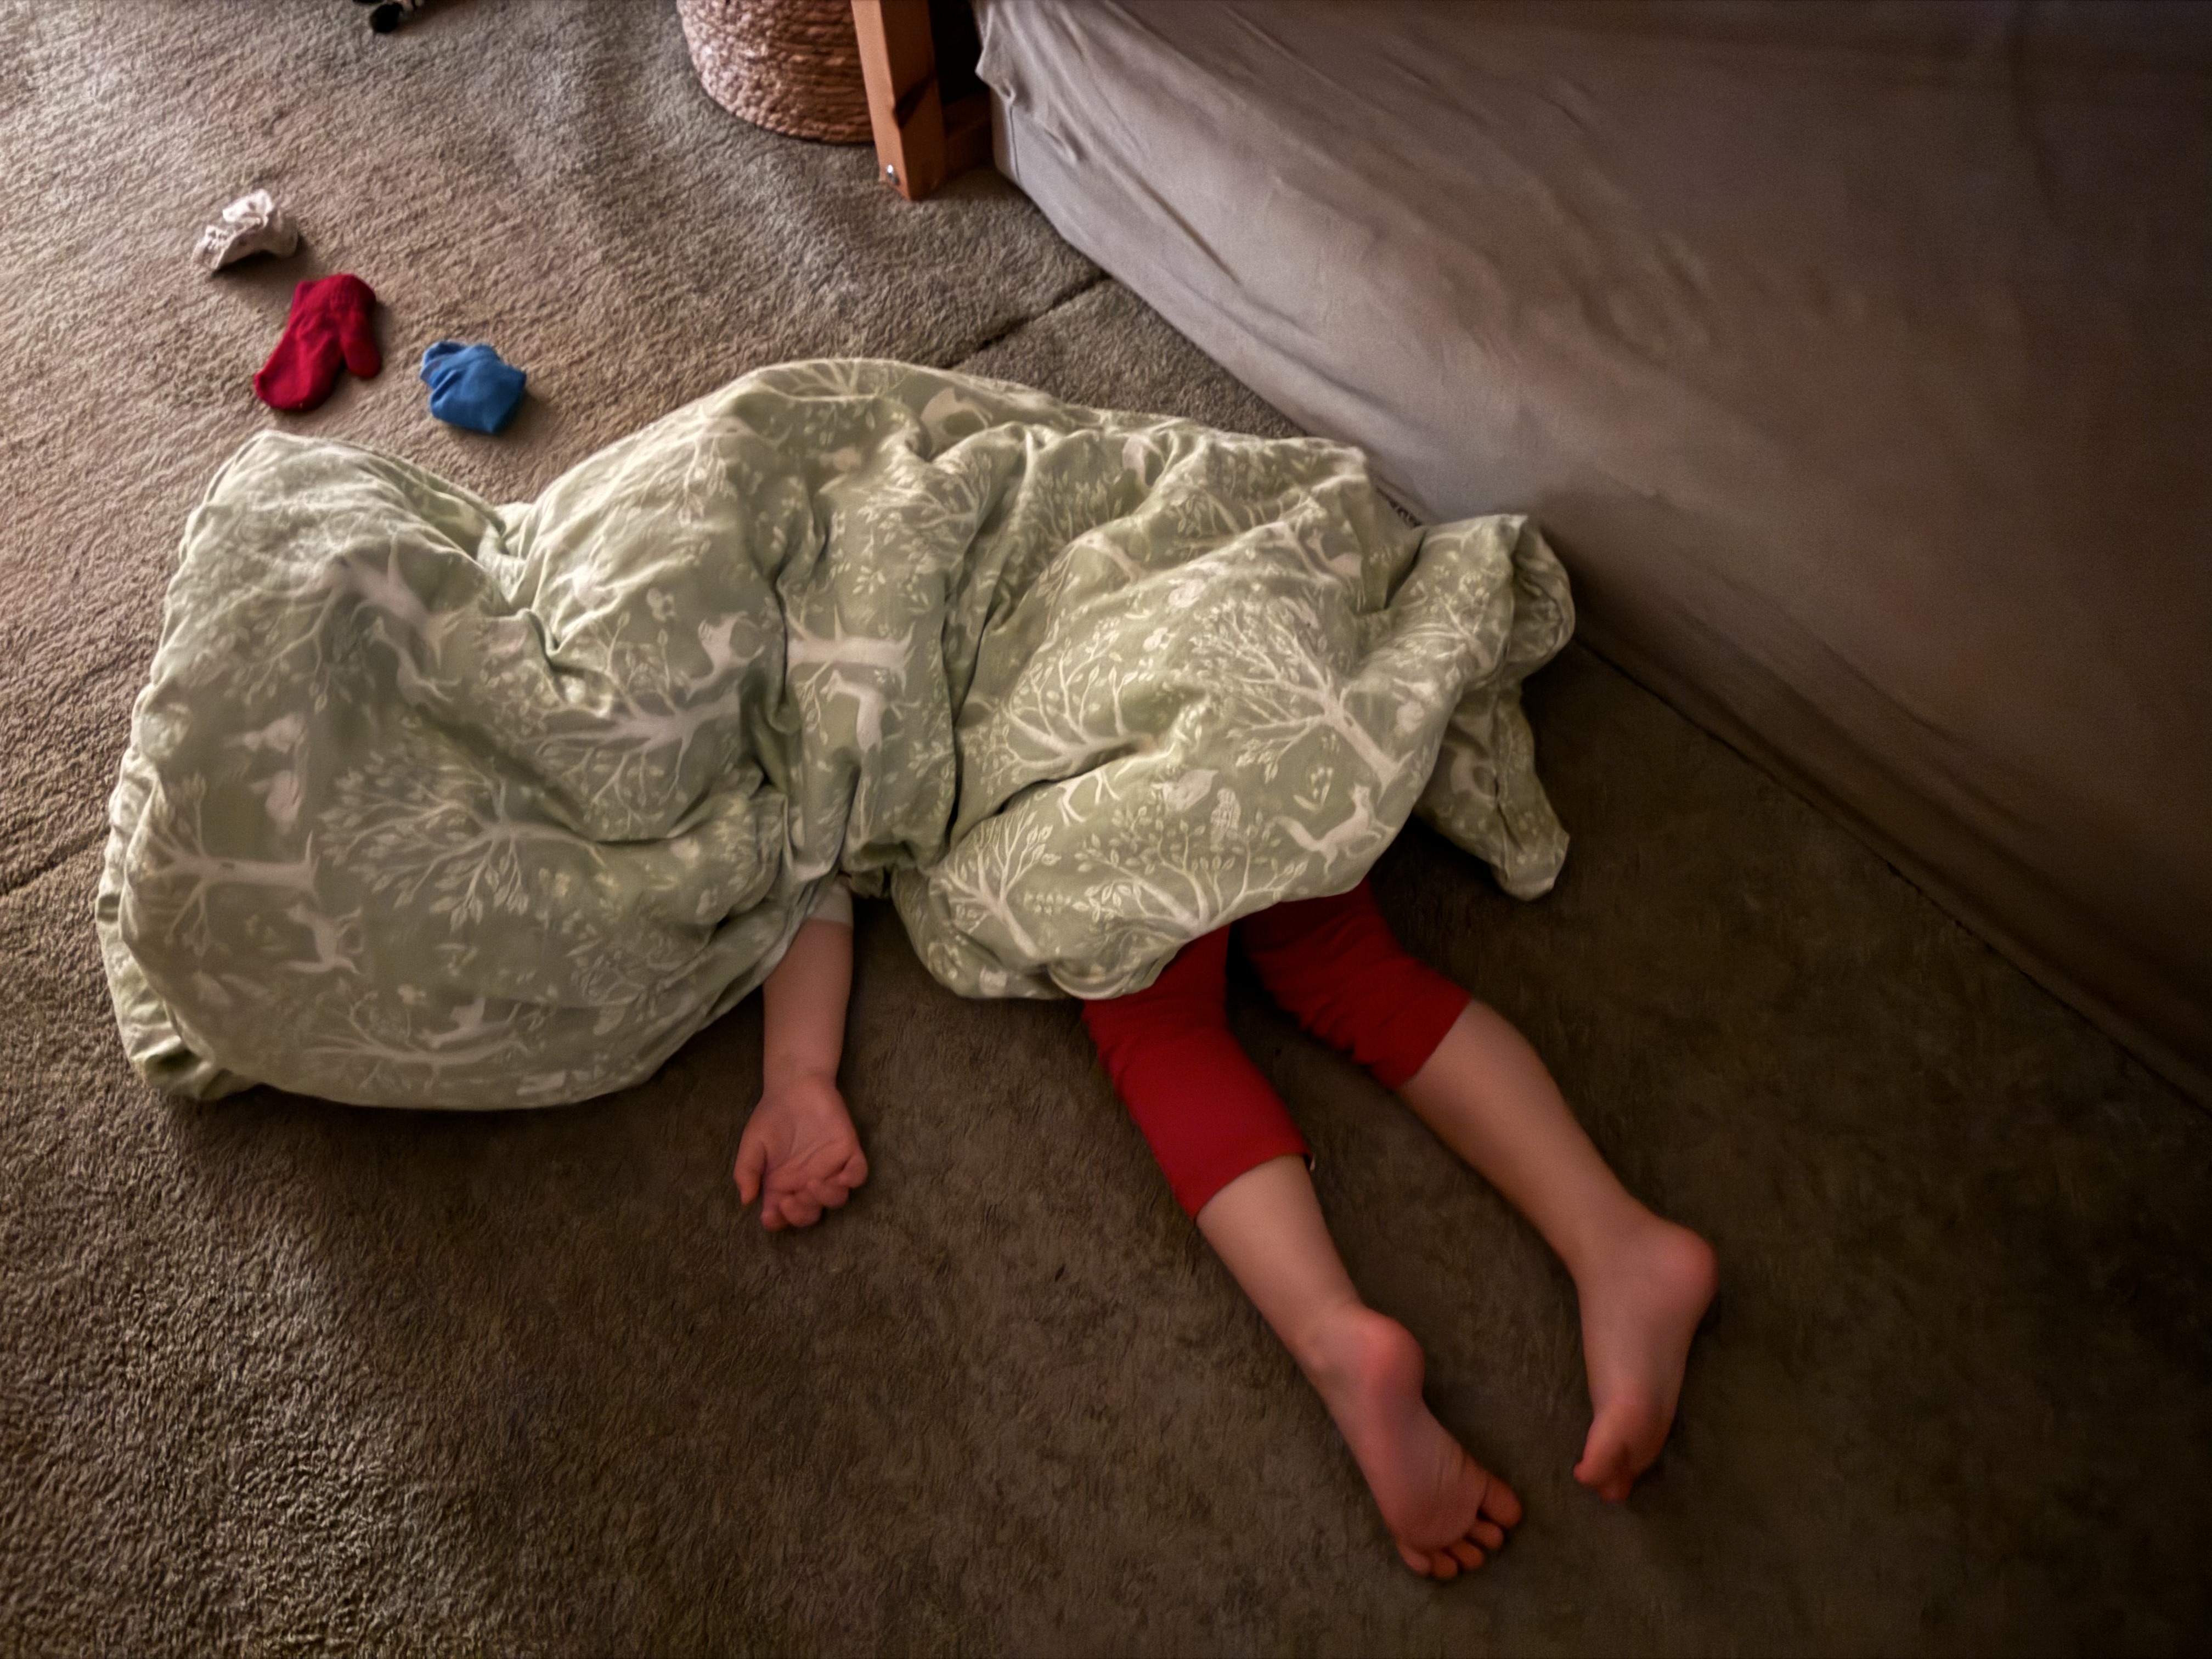 A blanket in a bundle on the carpet of a dark room, next to a mattress. V’s arm and legs are sticking out of the blanket.